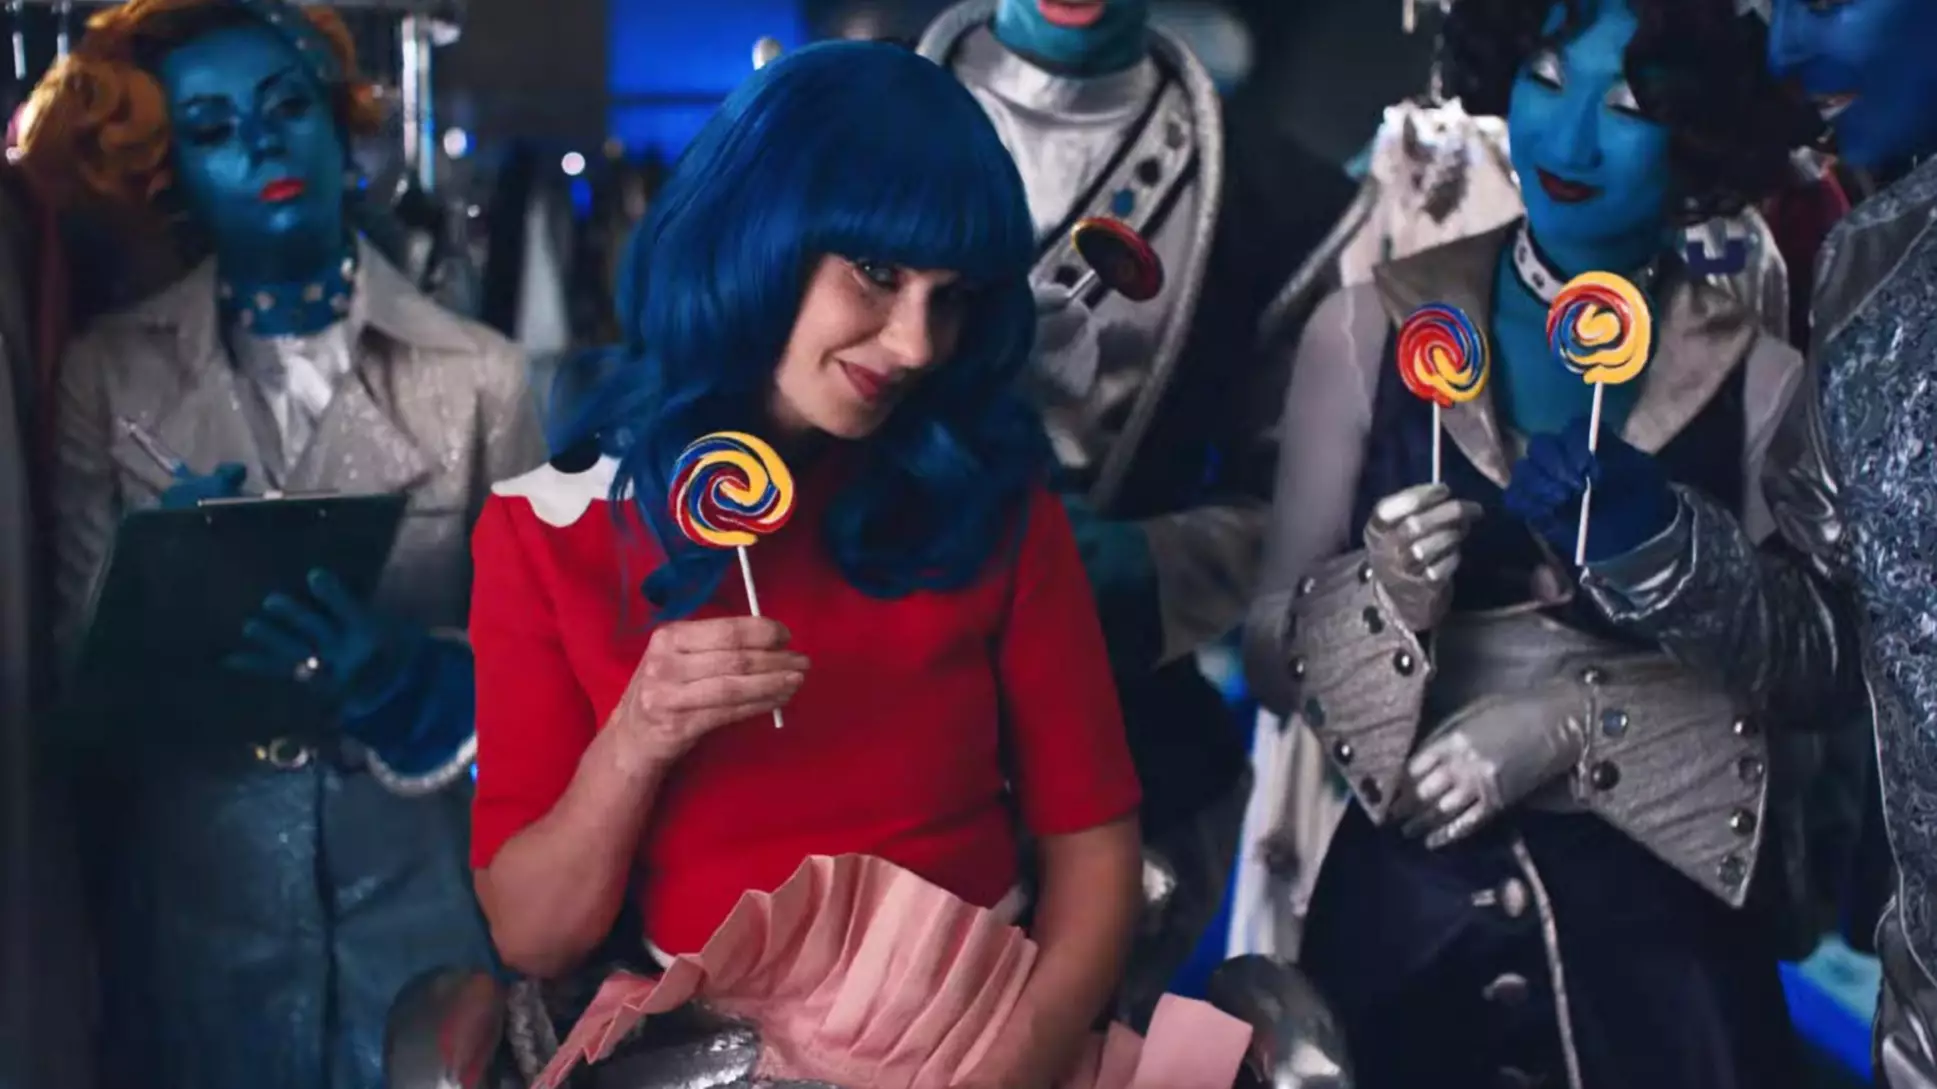 Zooey Deschanel Plays Katy Perry In New Music Video And People Are Convinced They Are The Same Person